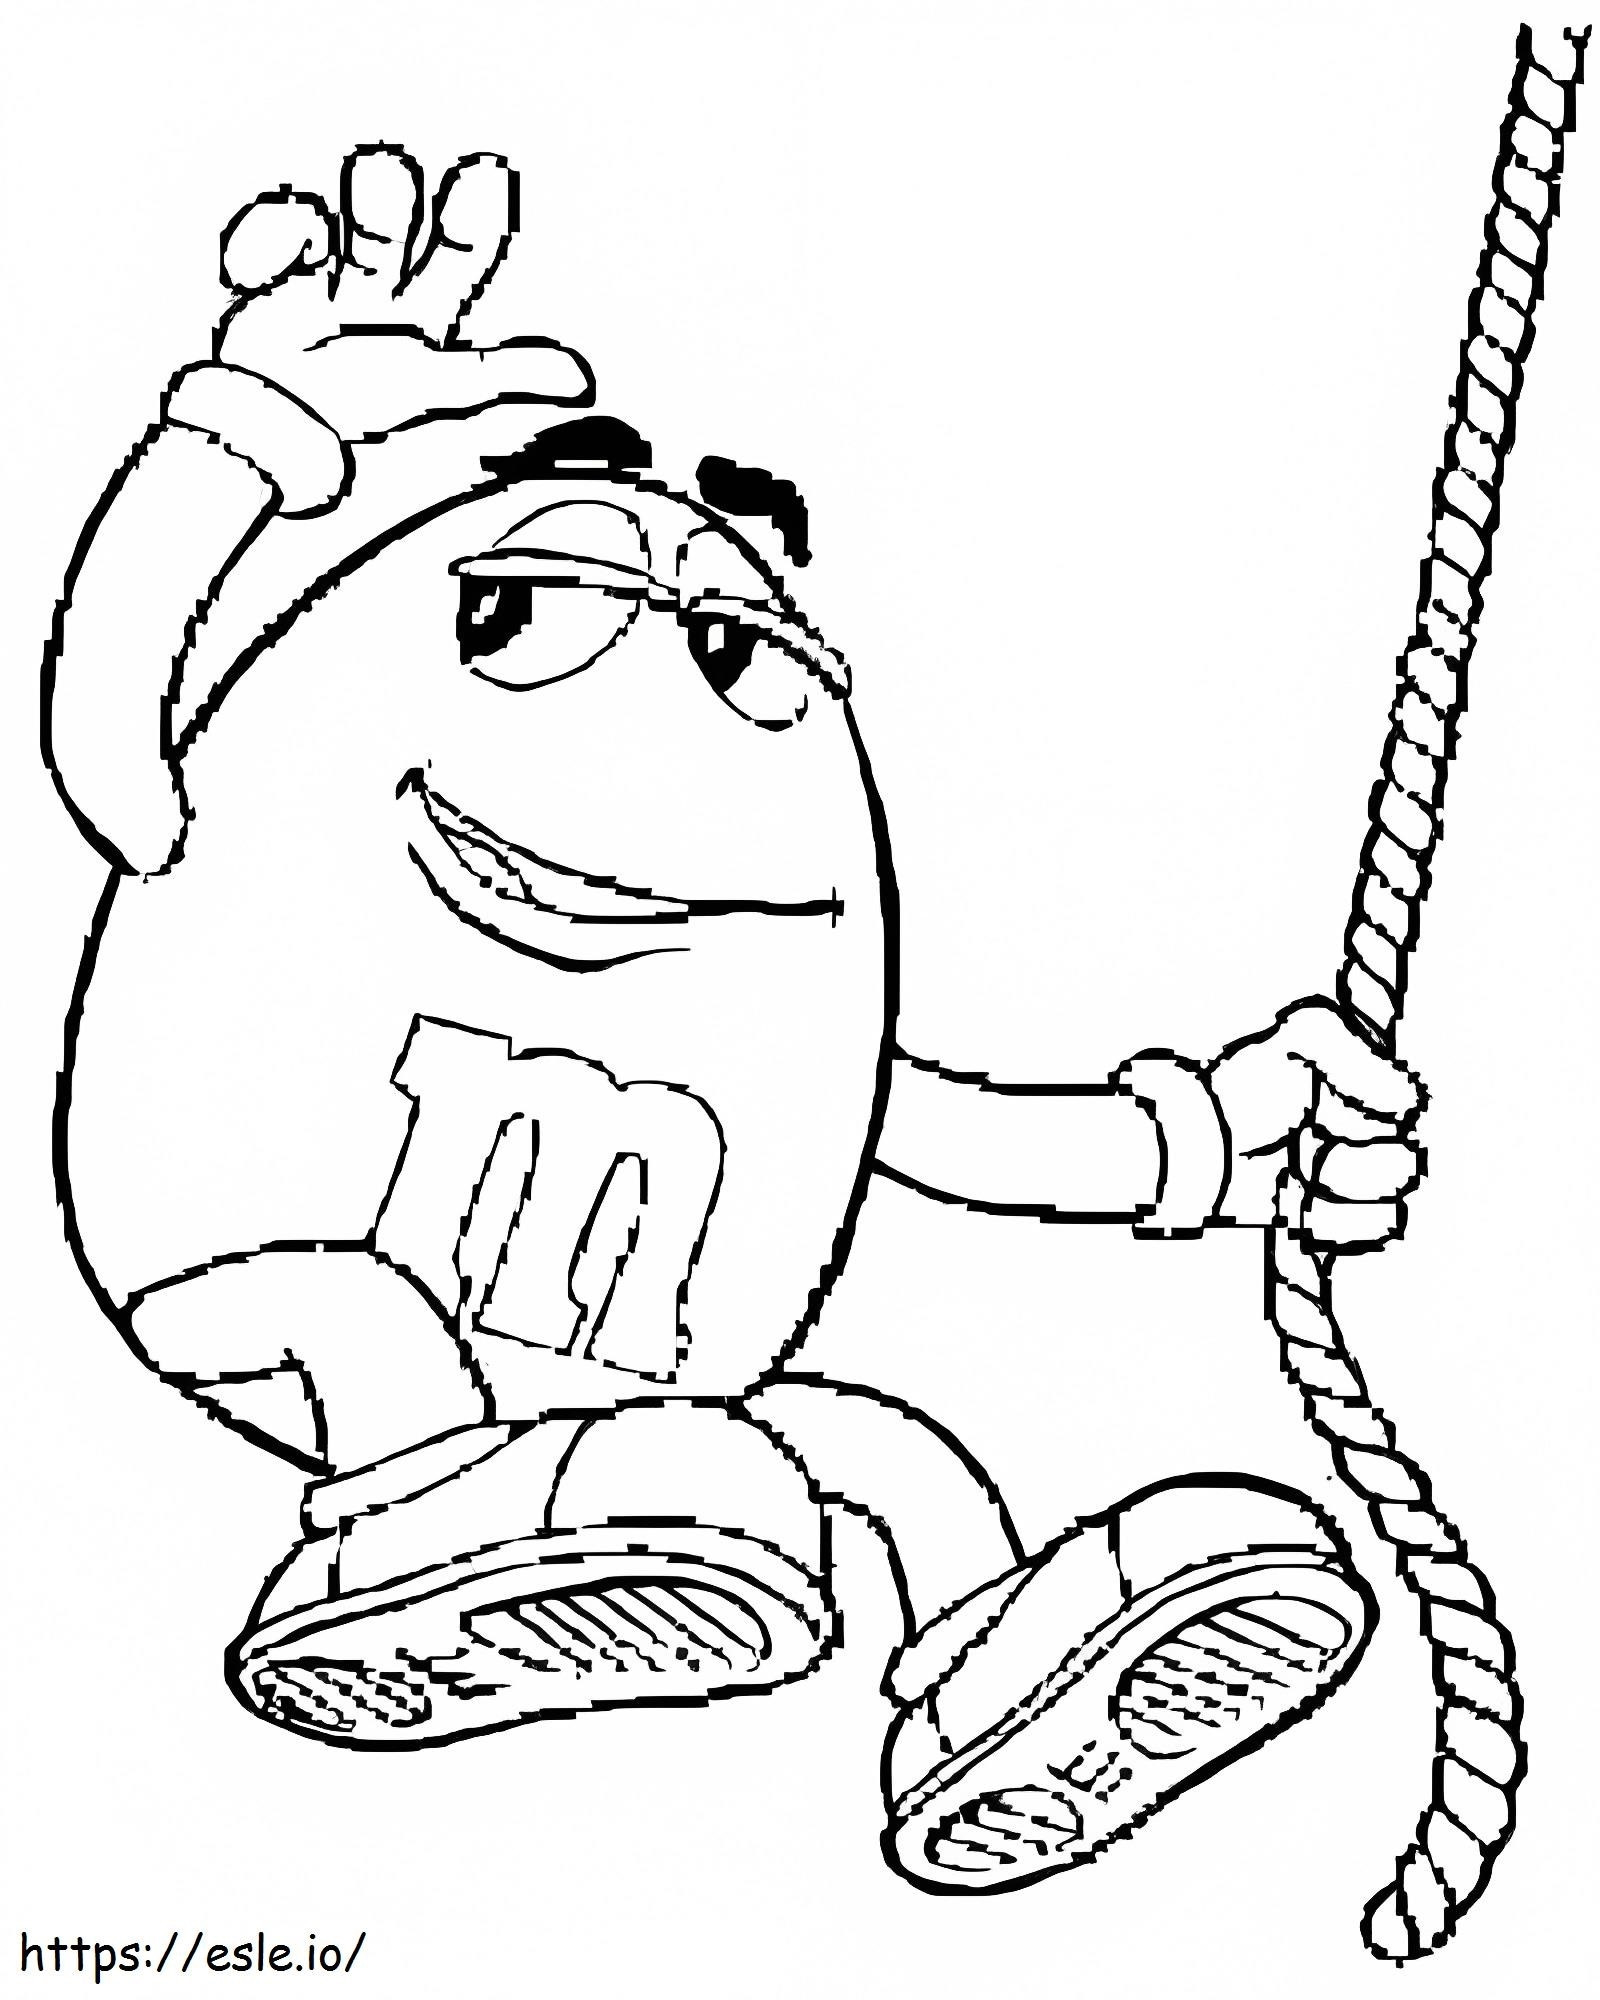 Mm 2 coloring page